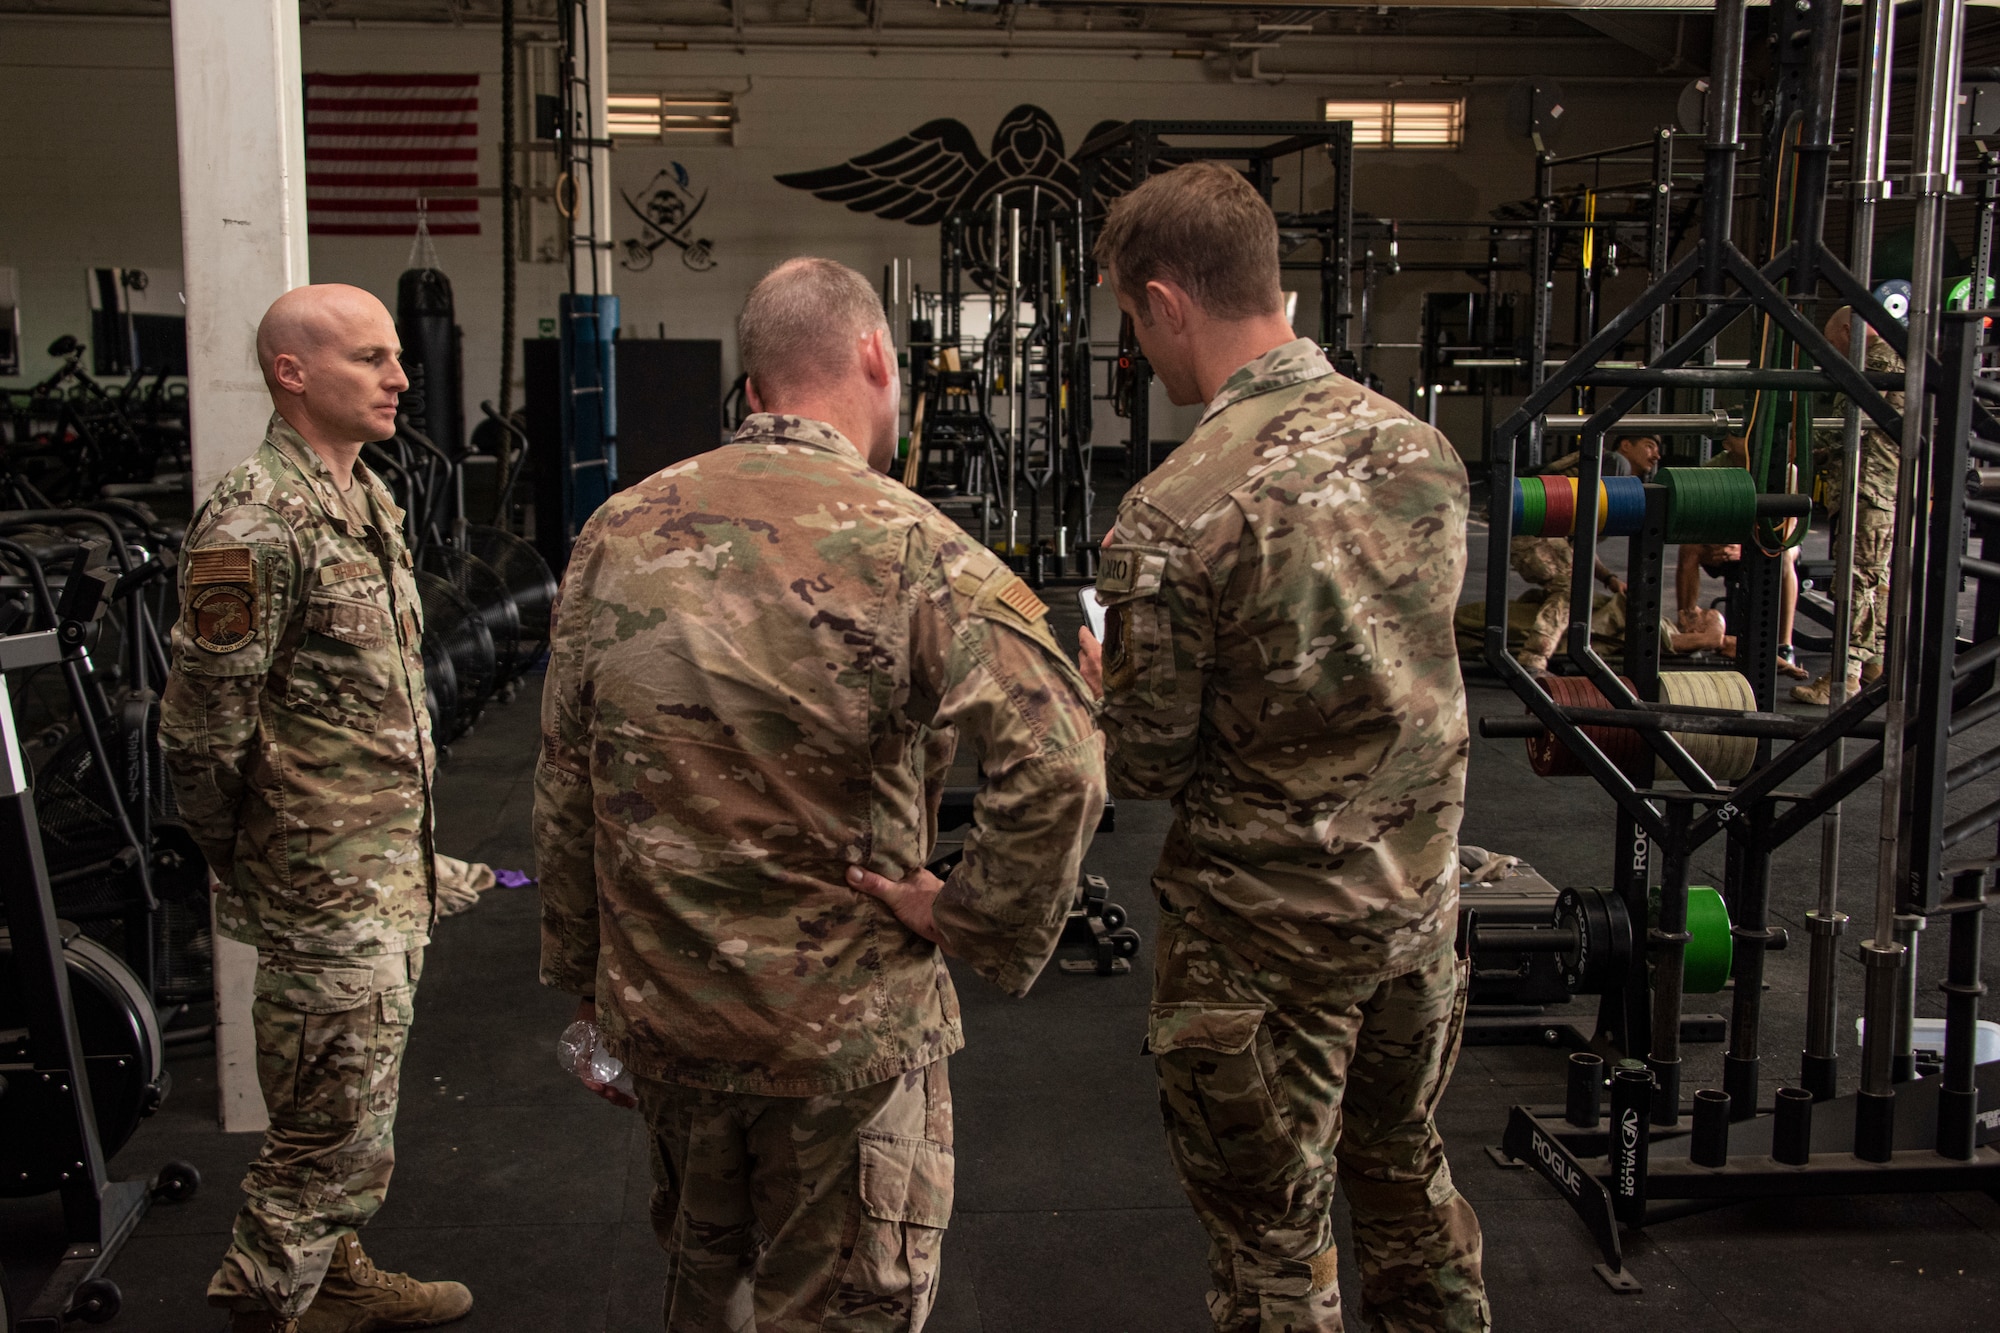 A photo of Airmen talking in a gym.